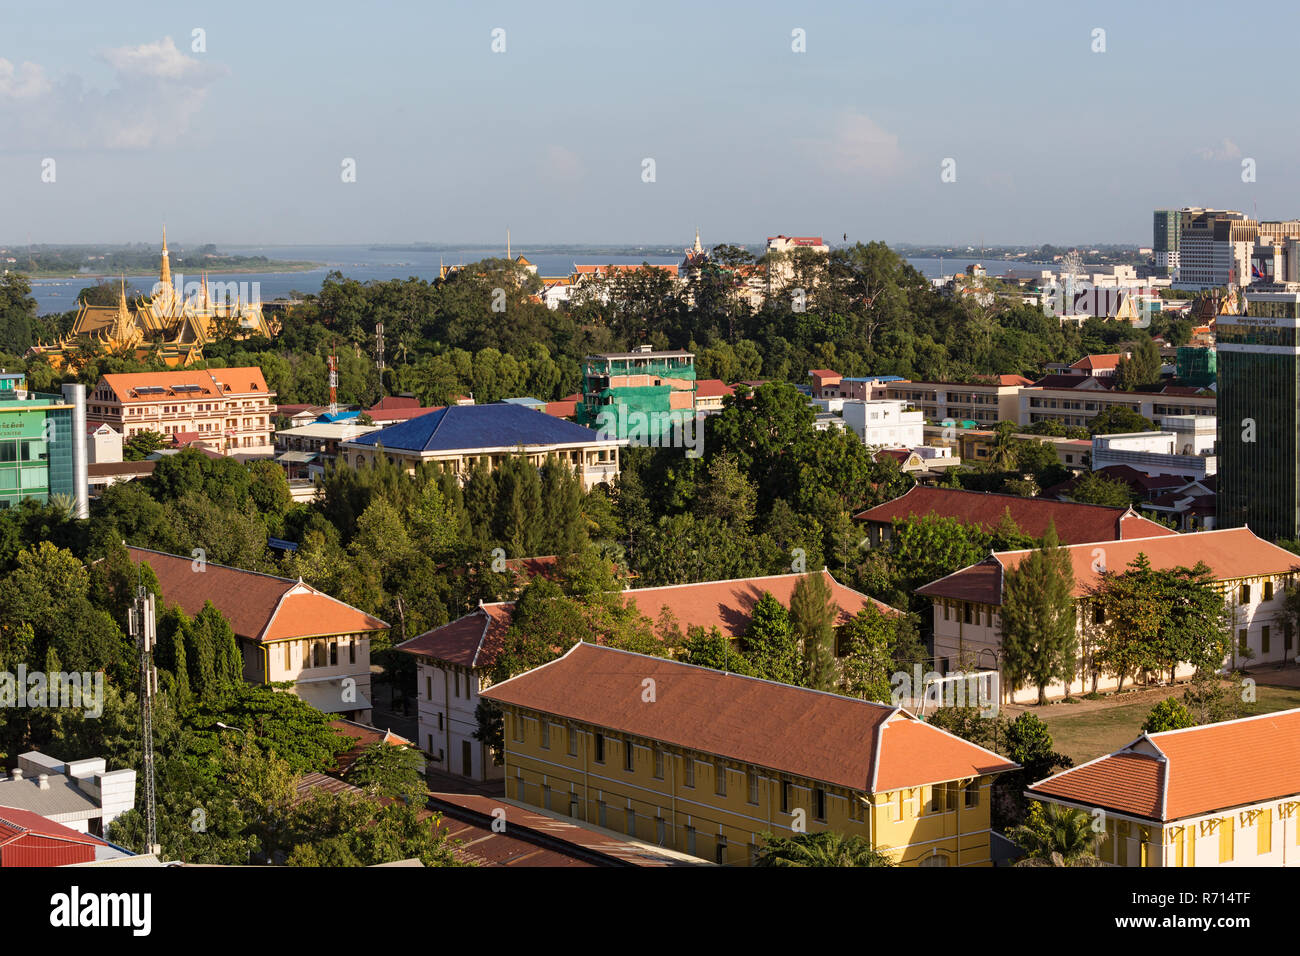 View on the Royal Palace, the Tonle Sap River and the Mekong, Sisovat College, cityscape, Phnom Penh, Cambodia Stock Photo